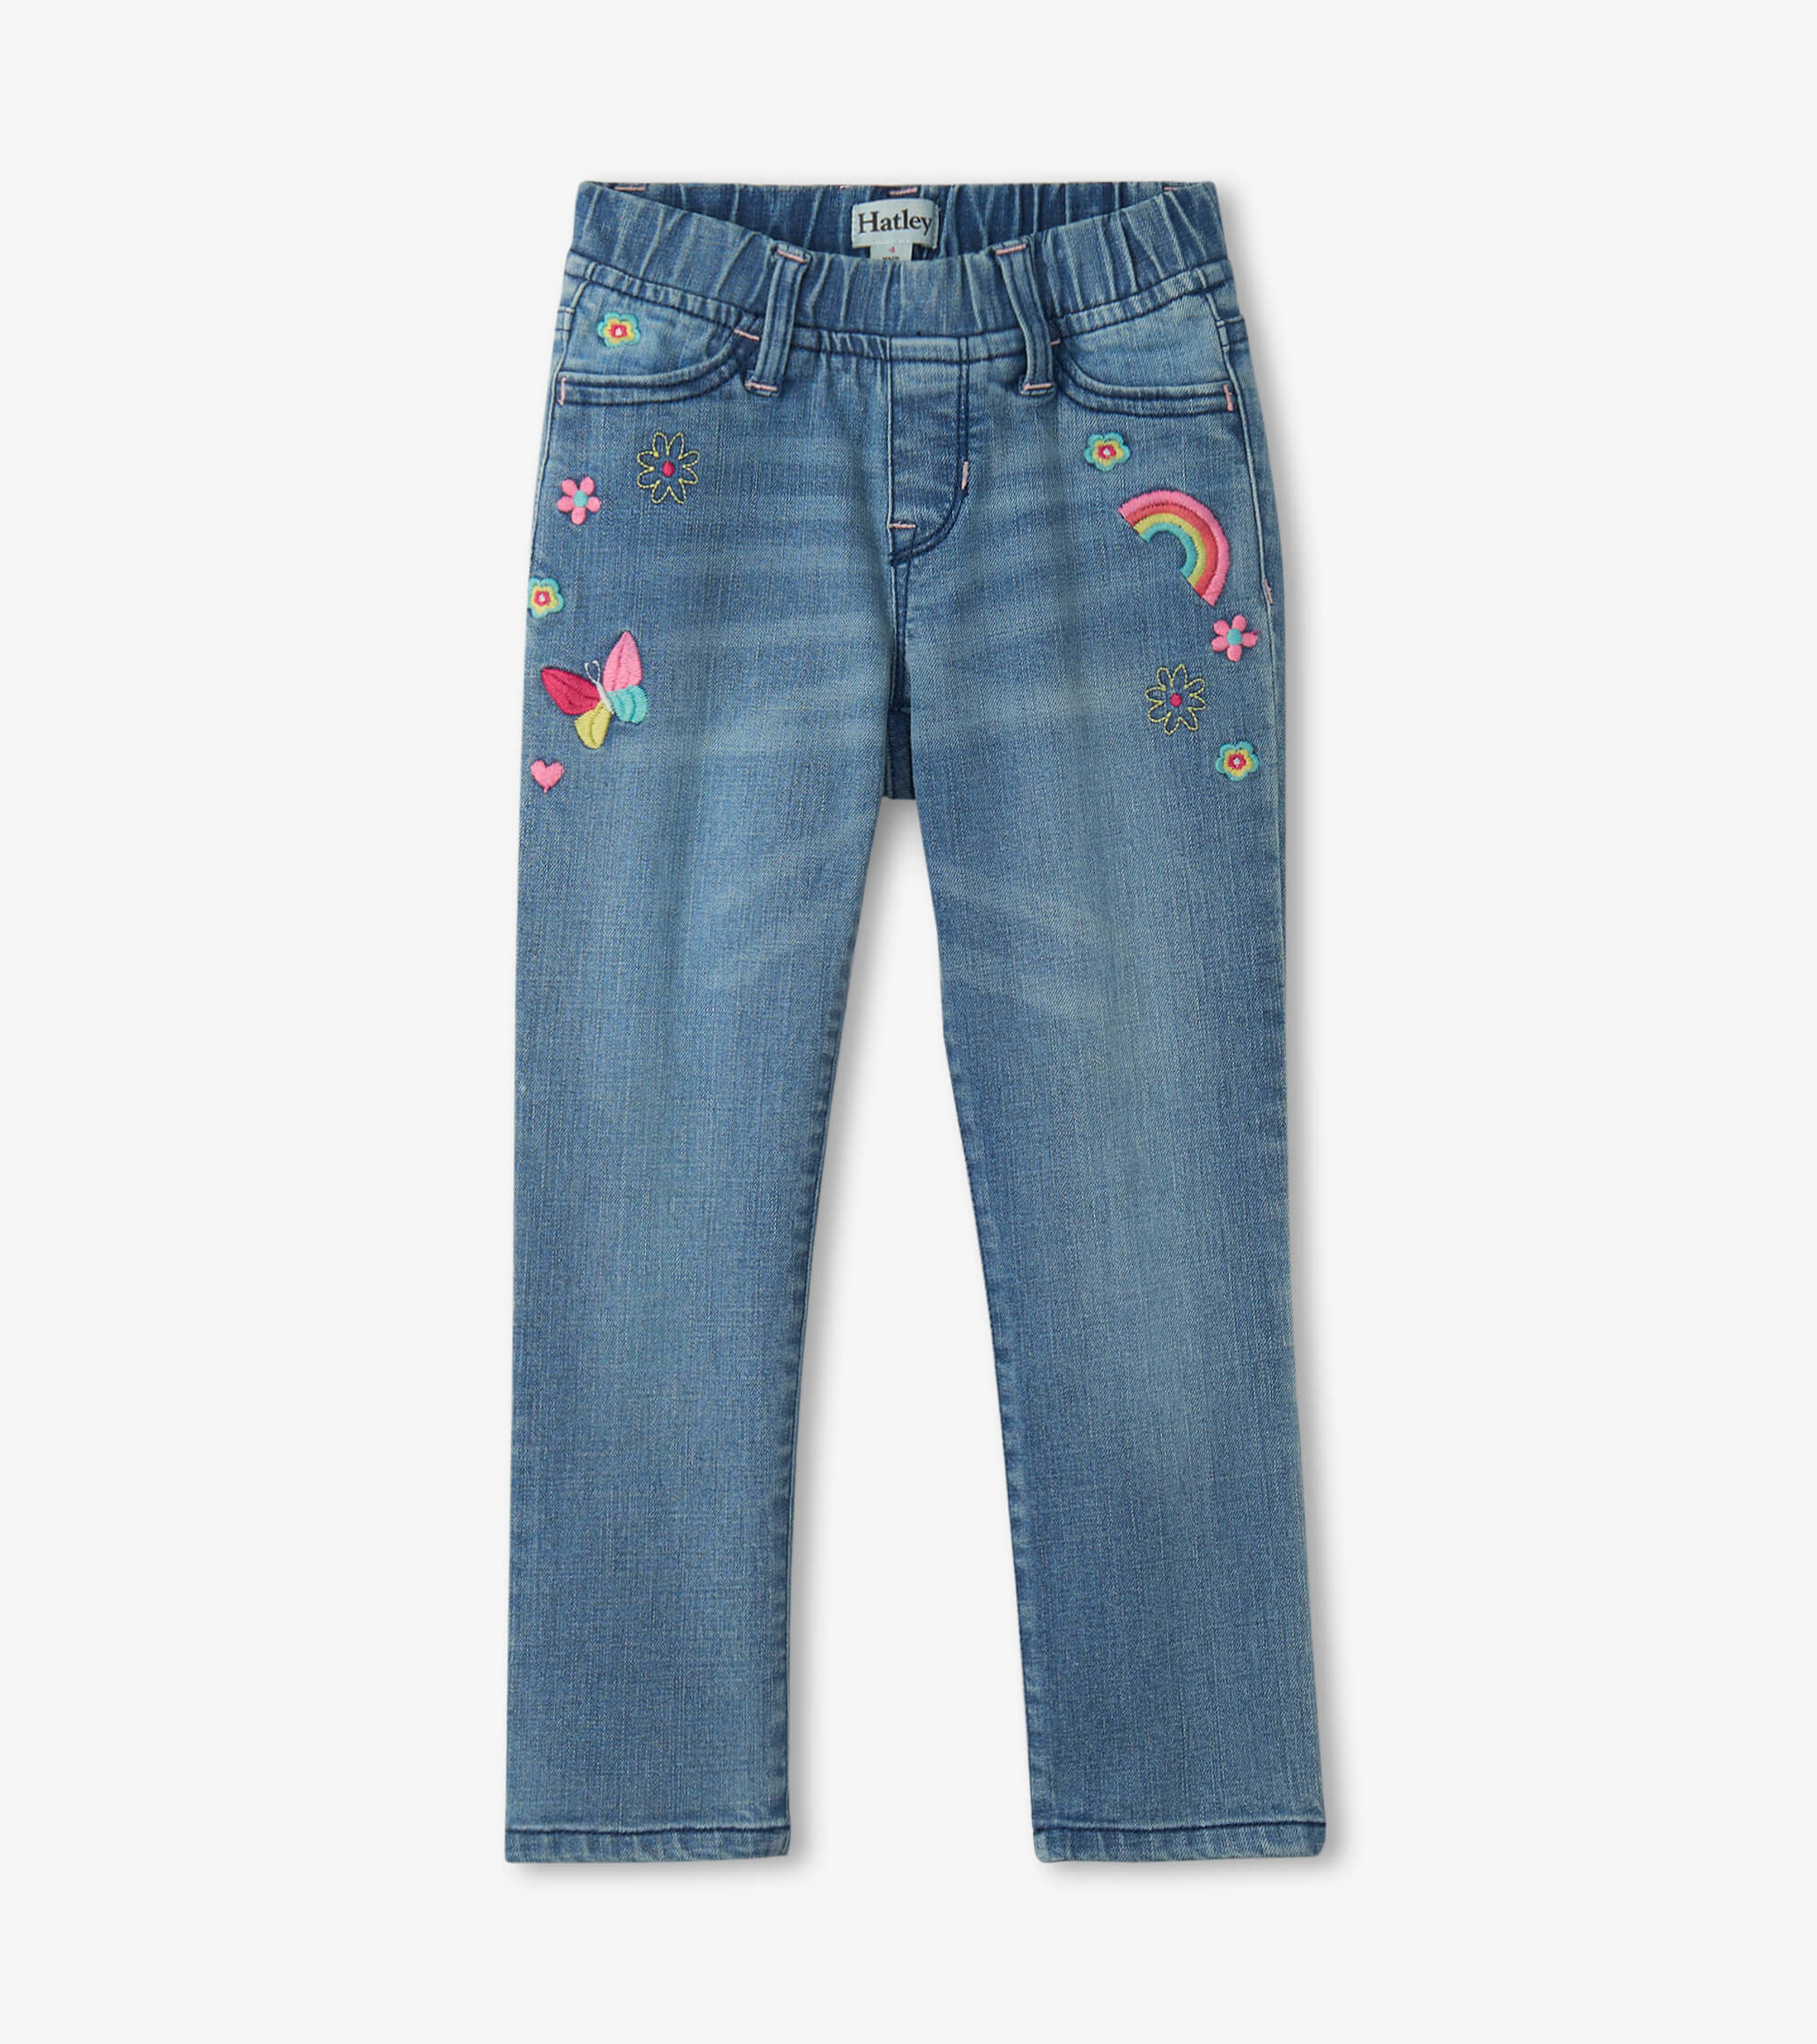 Pretty Patches Stretch Denim Jeans - Hatley US